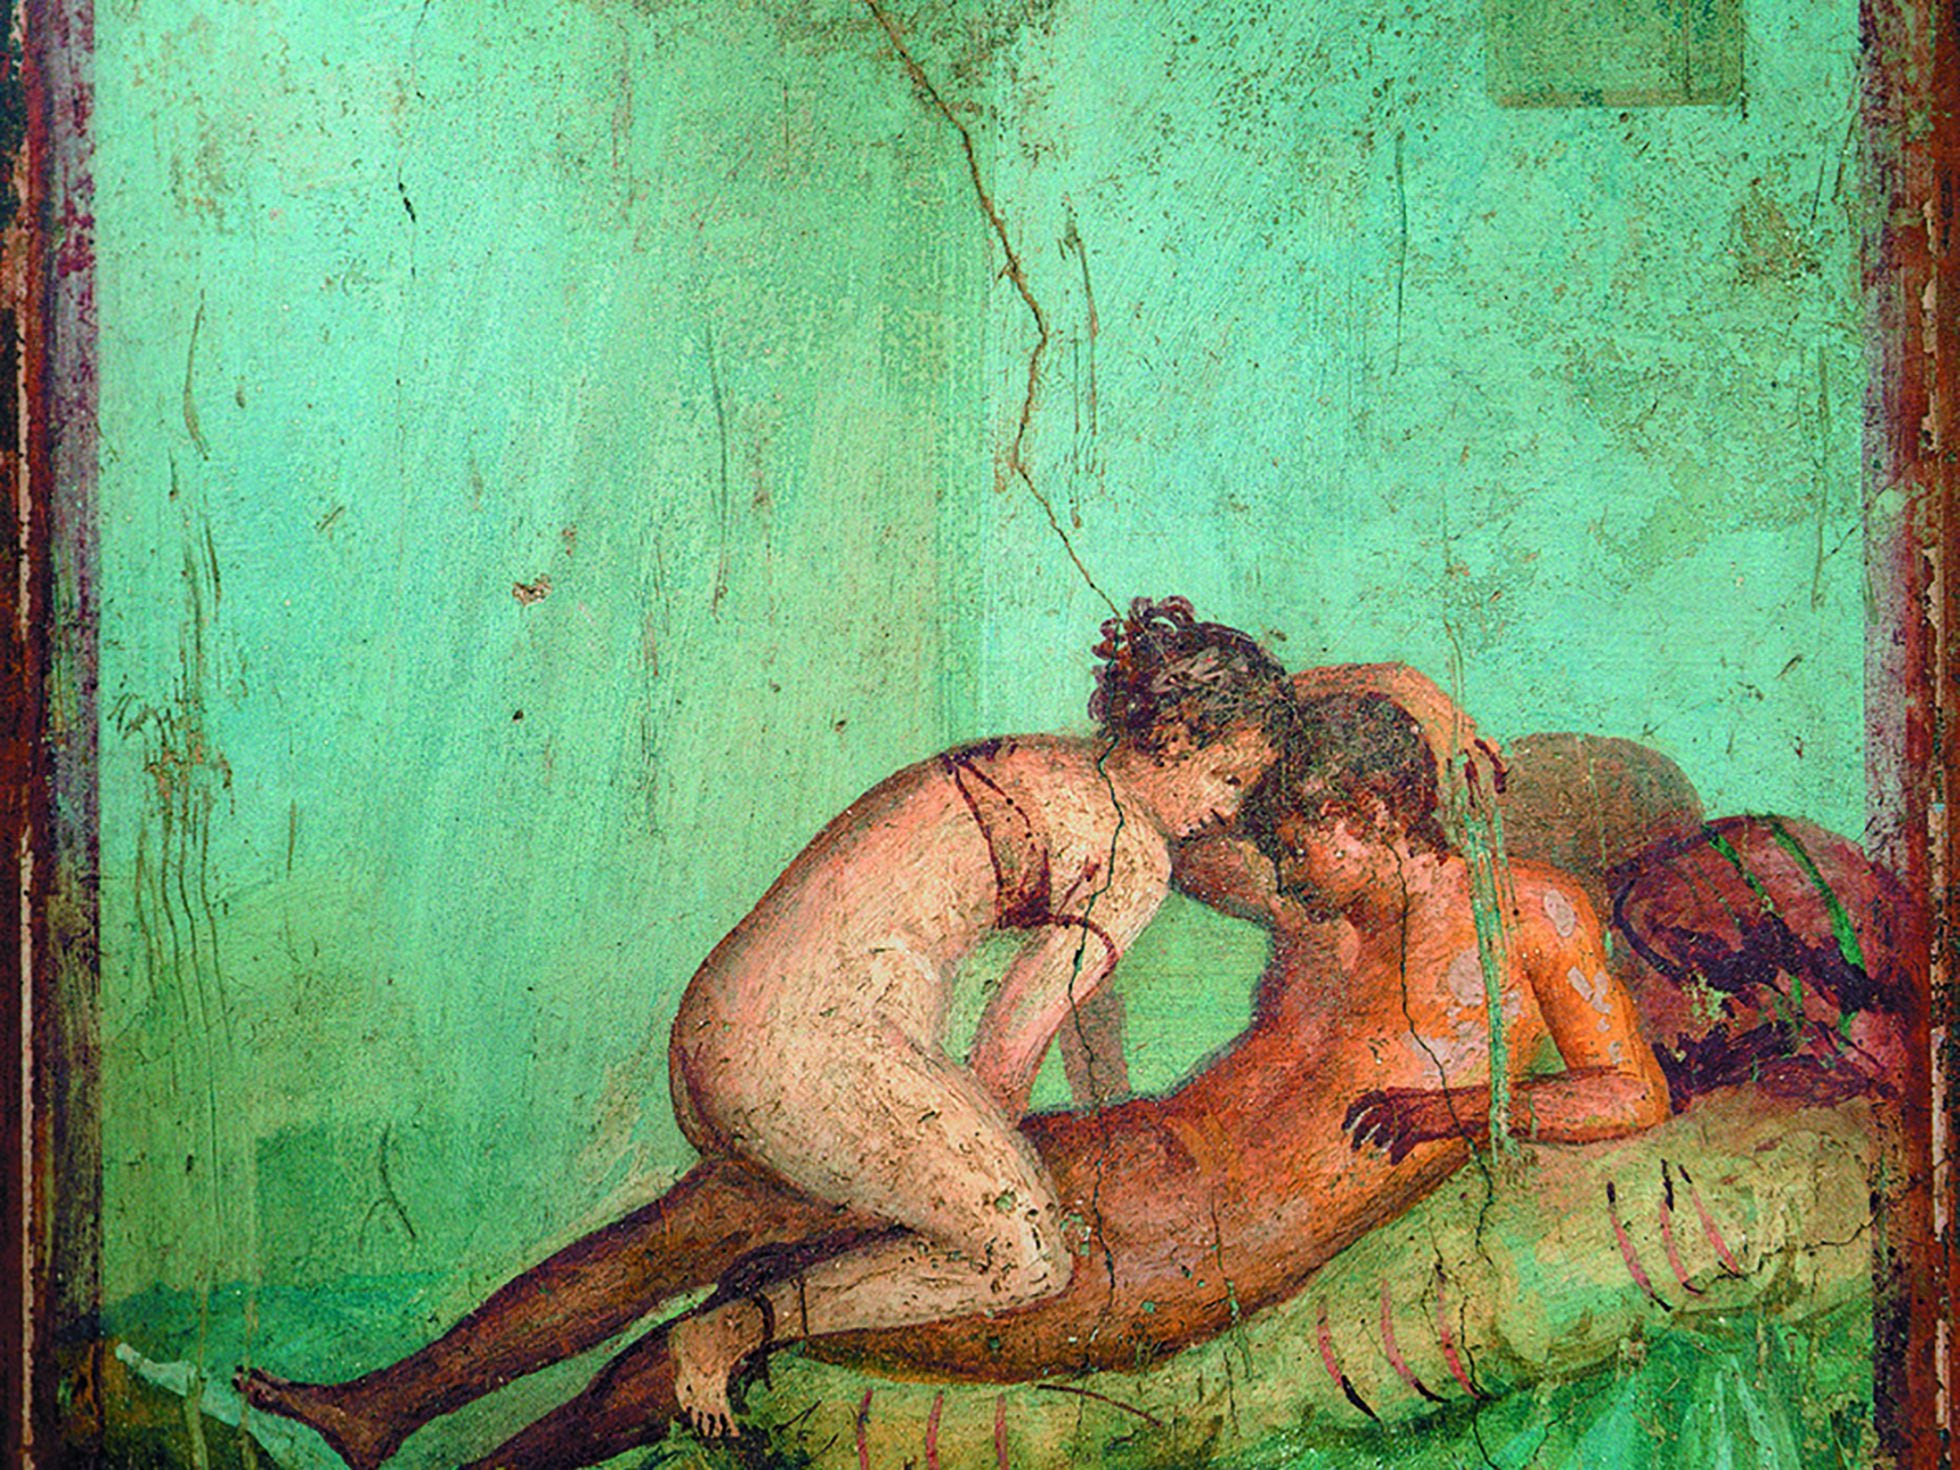 Women Boy Sex And Punishment - Sex in Ancient Rome: a violent approach to lovemaking | Culture | EL PAÃS  English